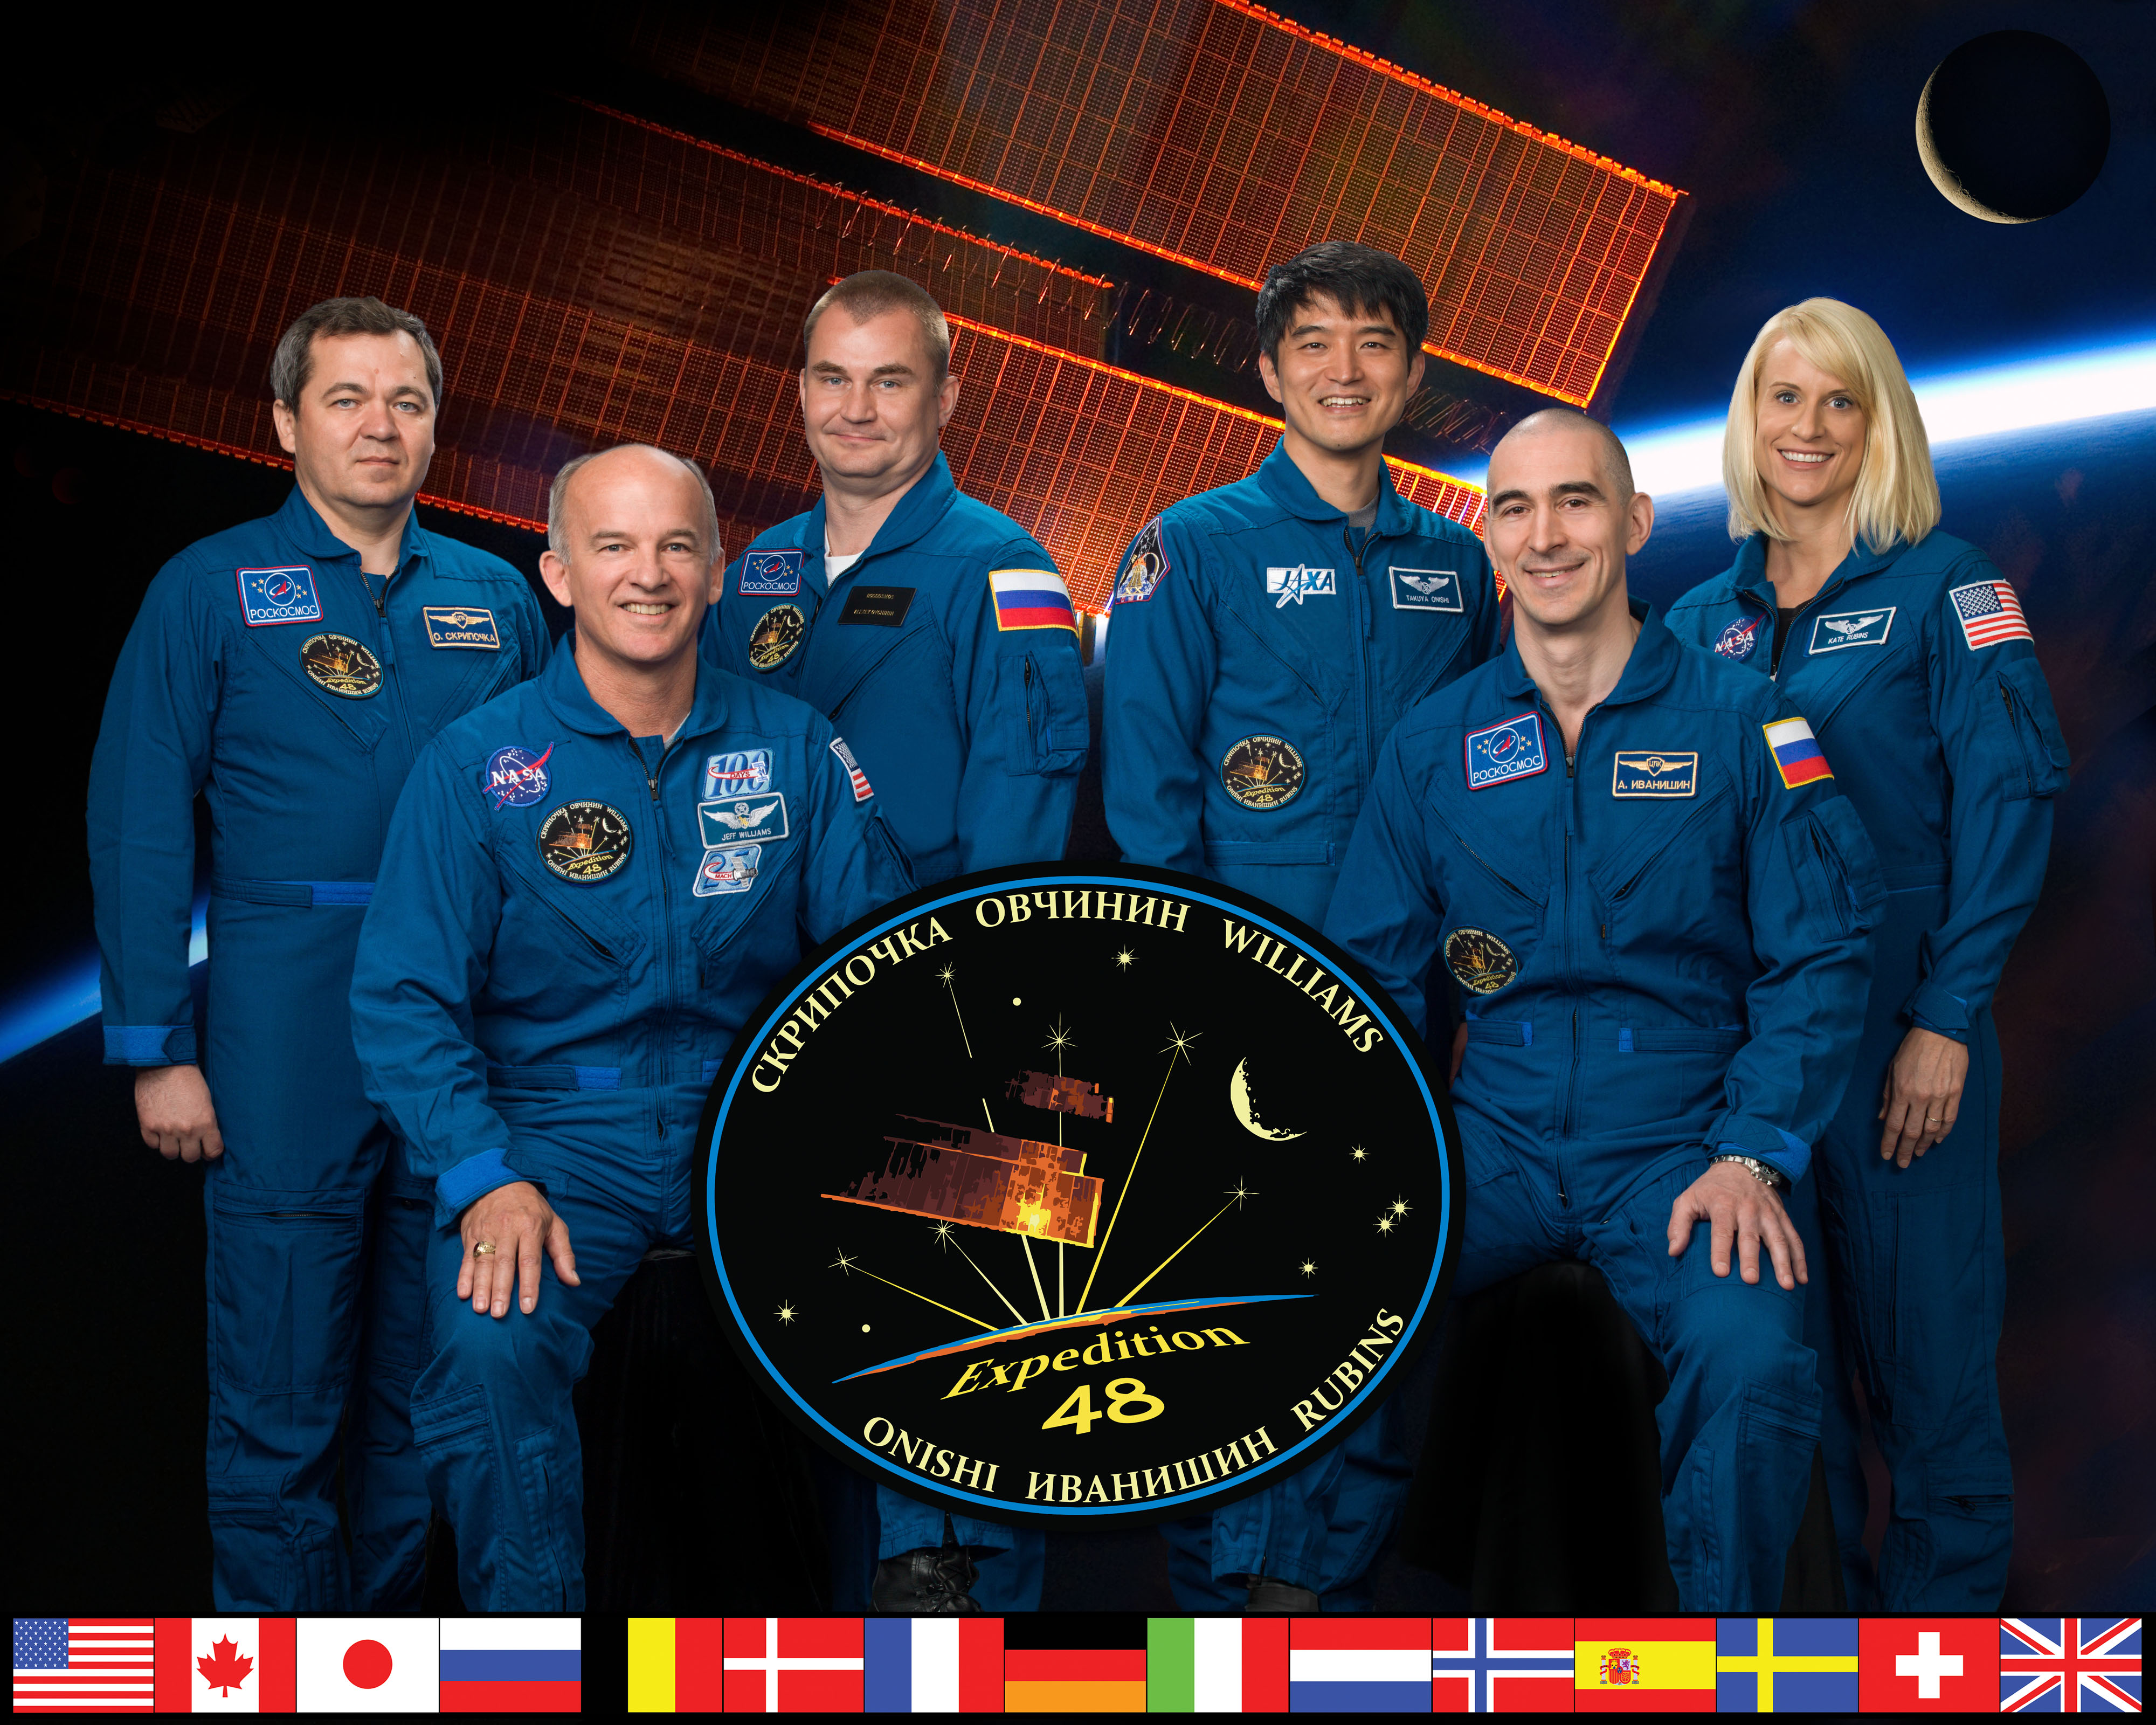 Expedition 48 Official Crew Portrait